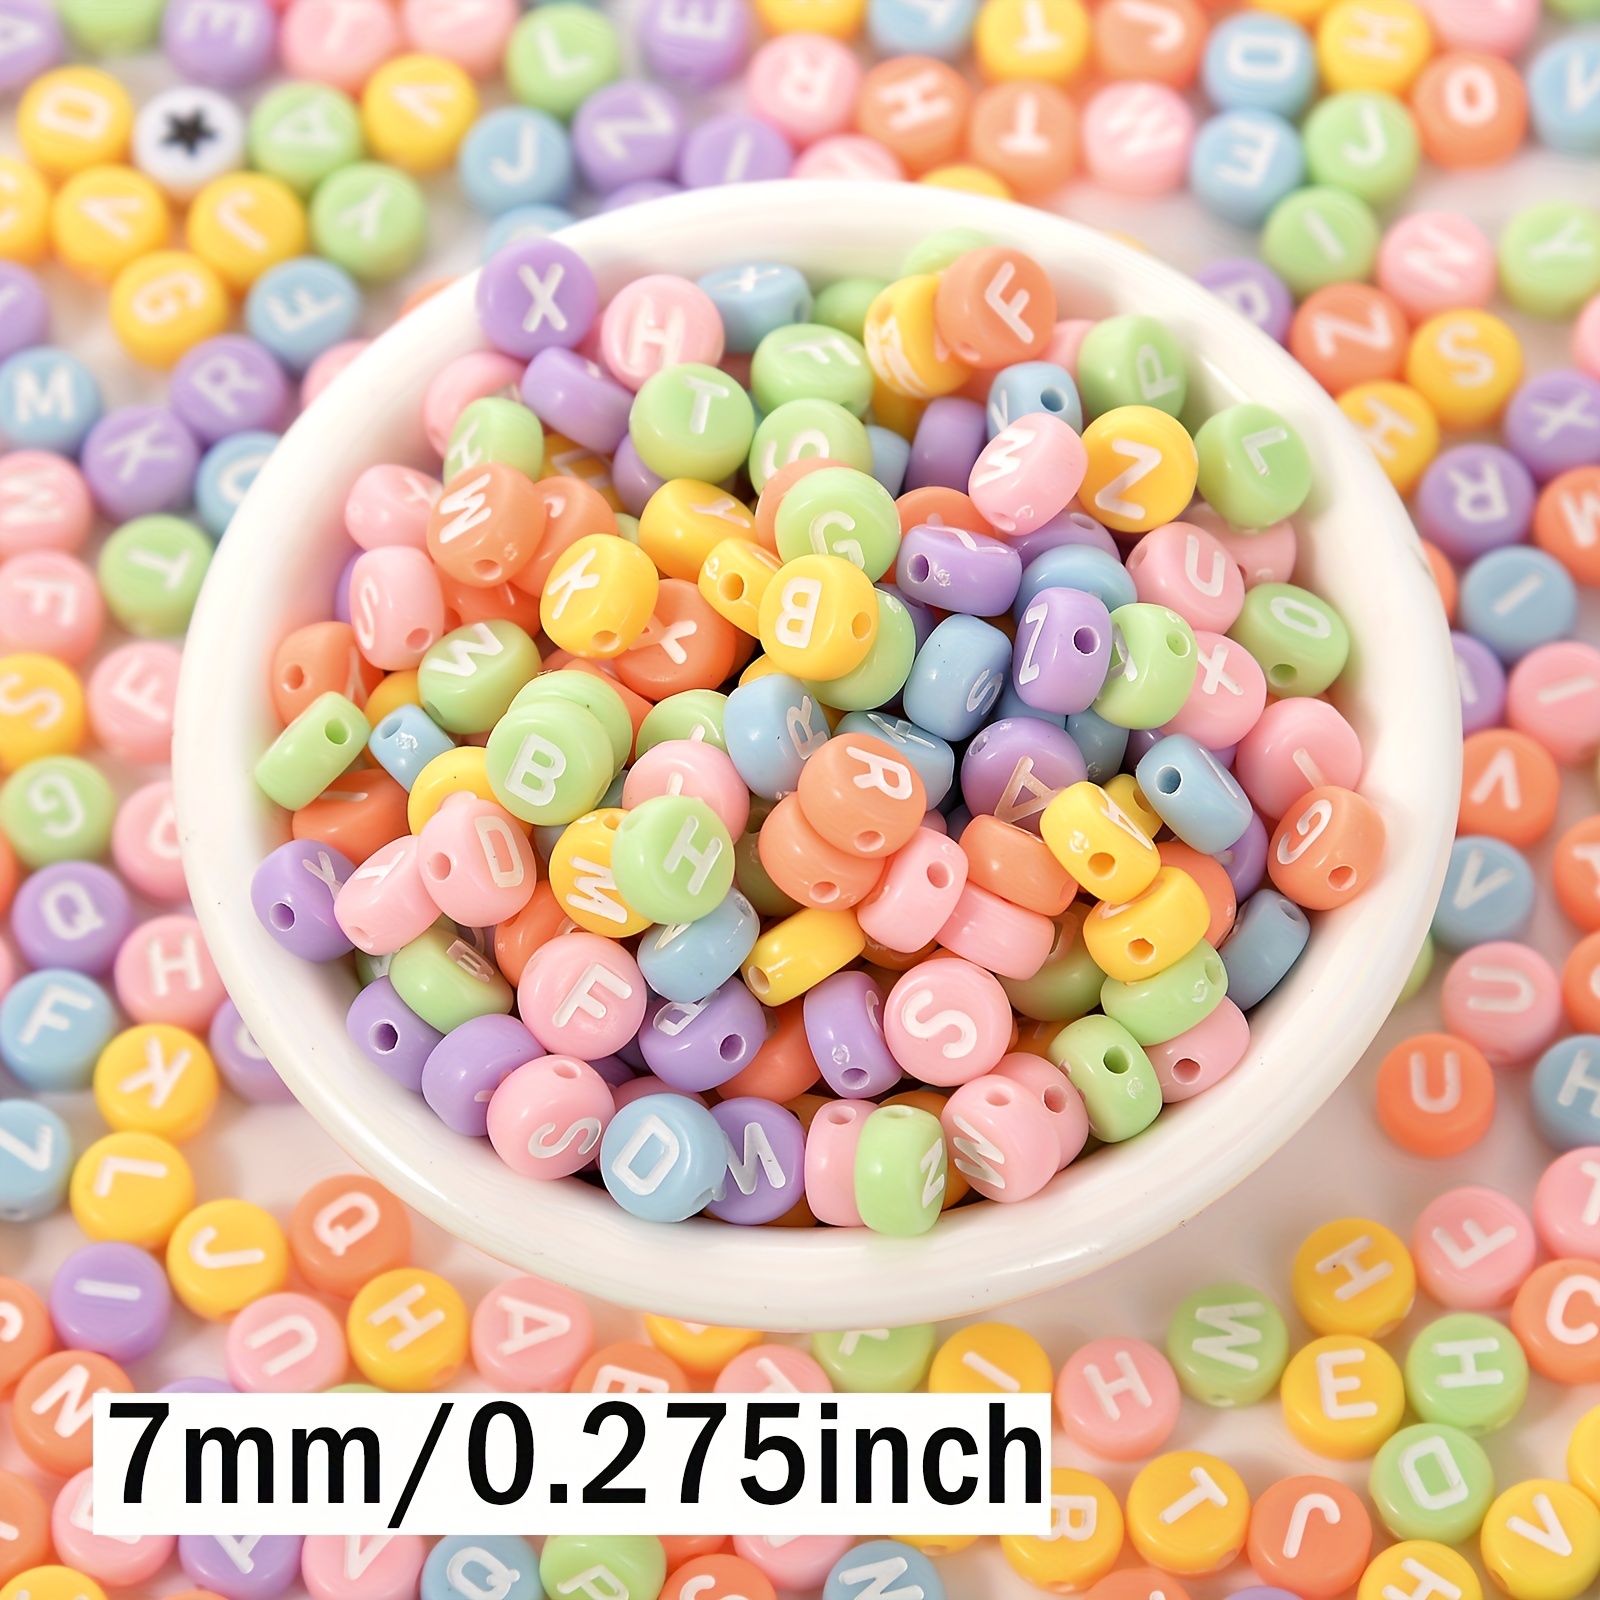 POP! Possibilities 7mm Beads - Alphabet on White by POP!